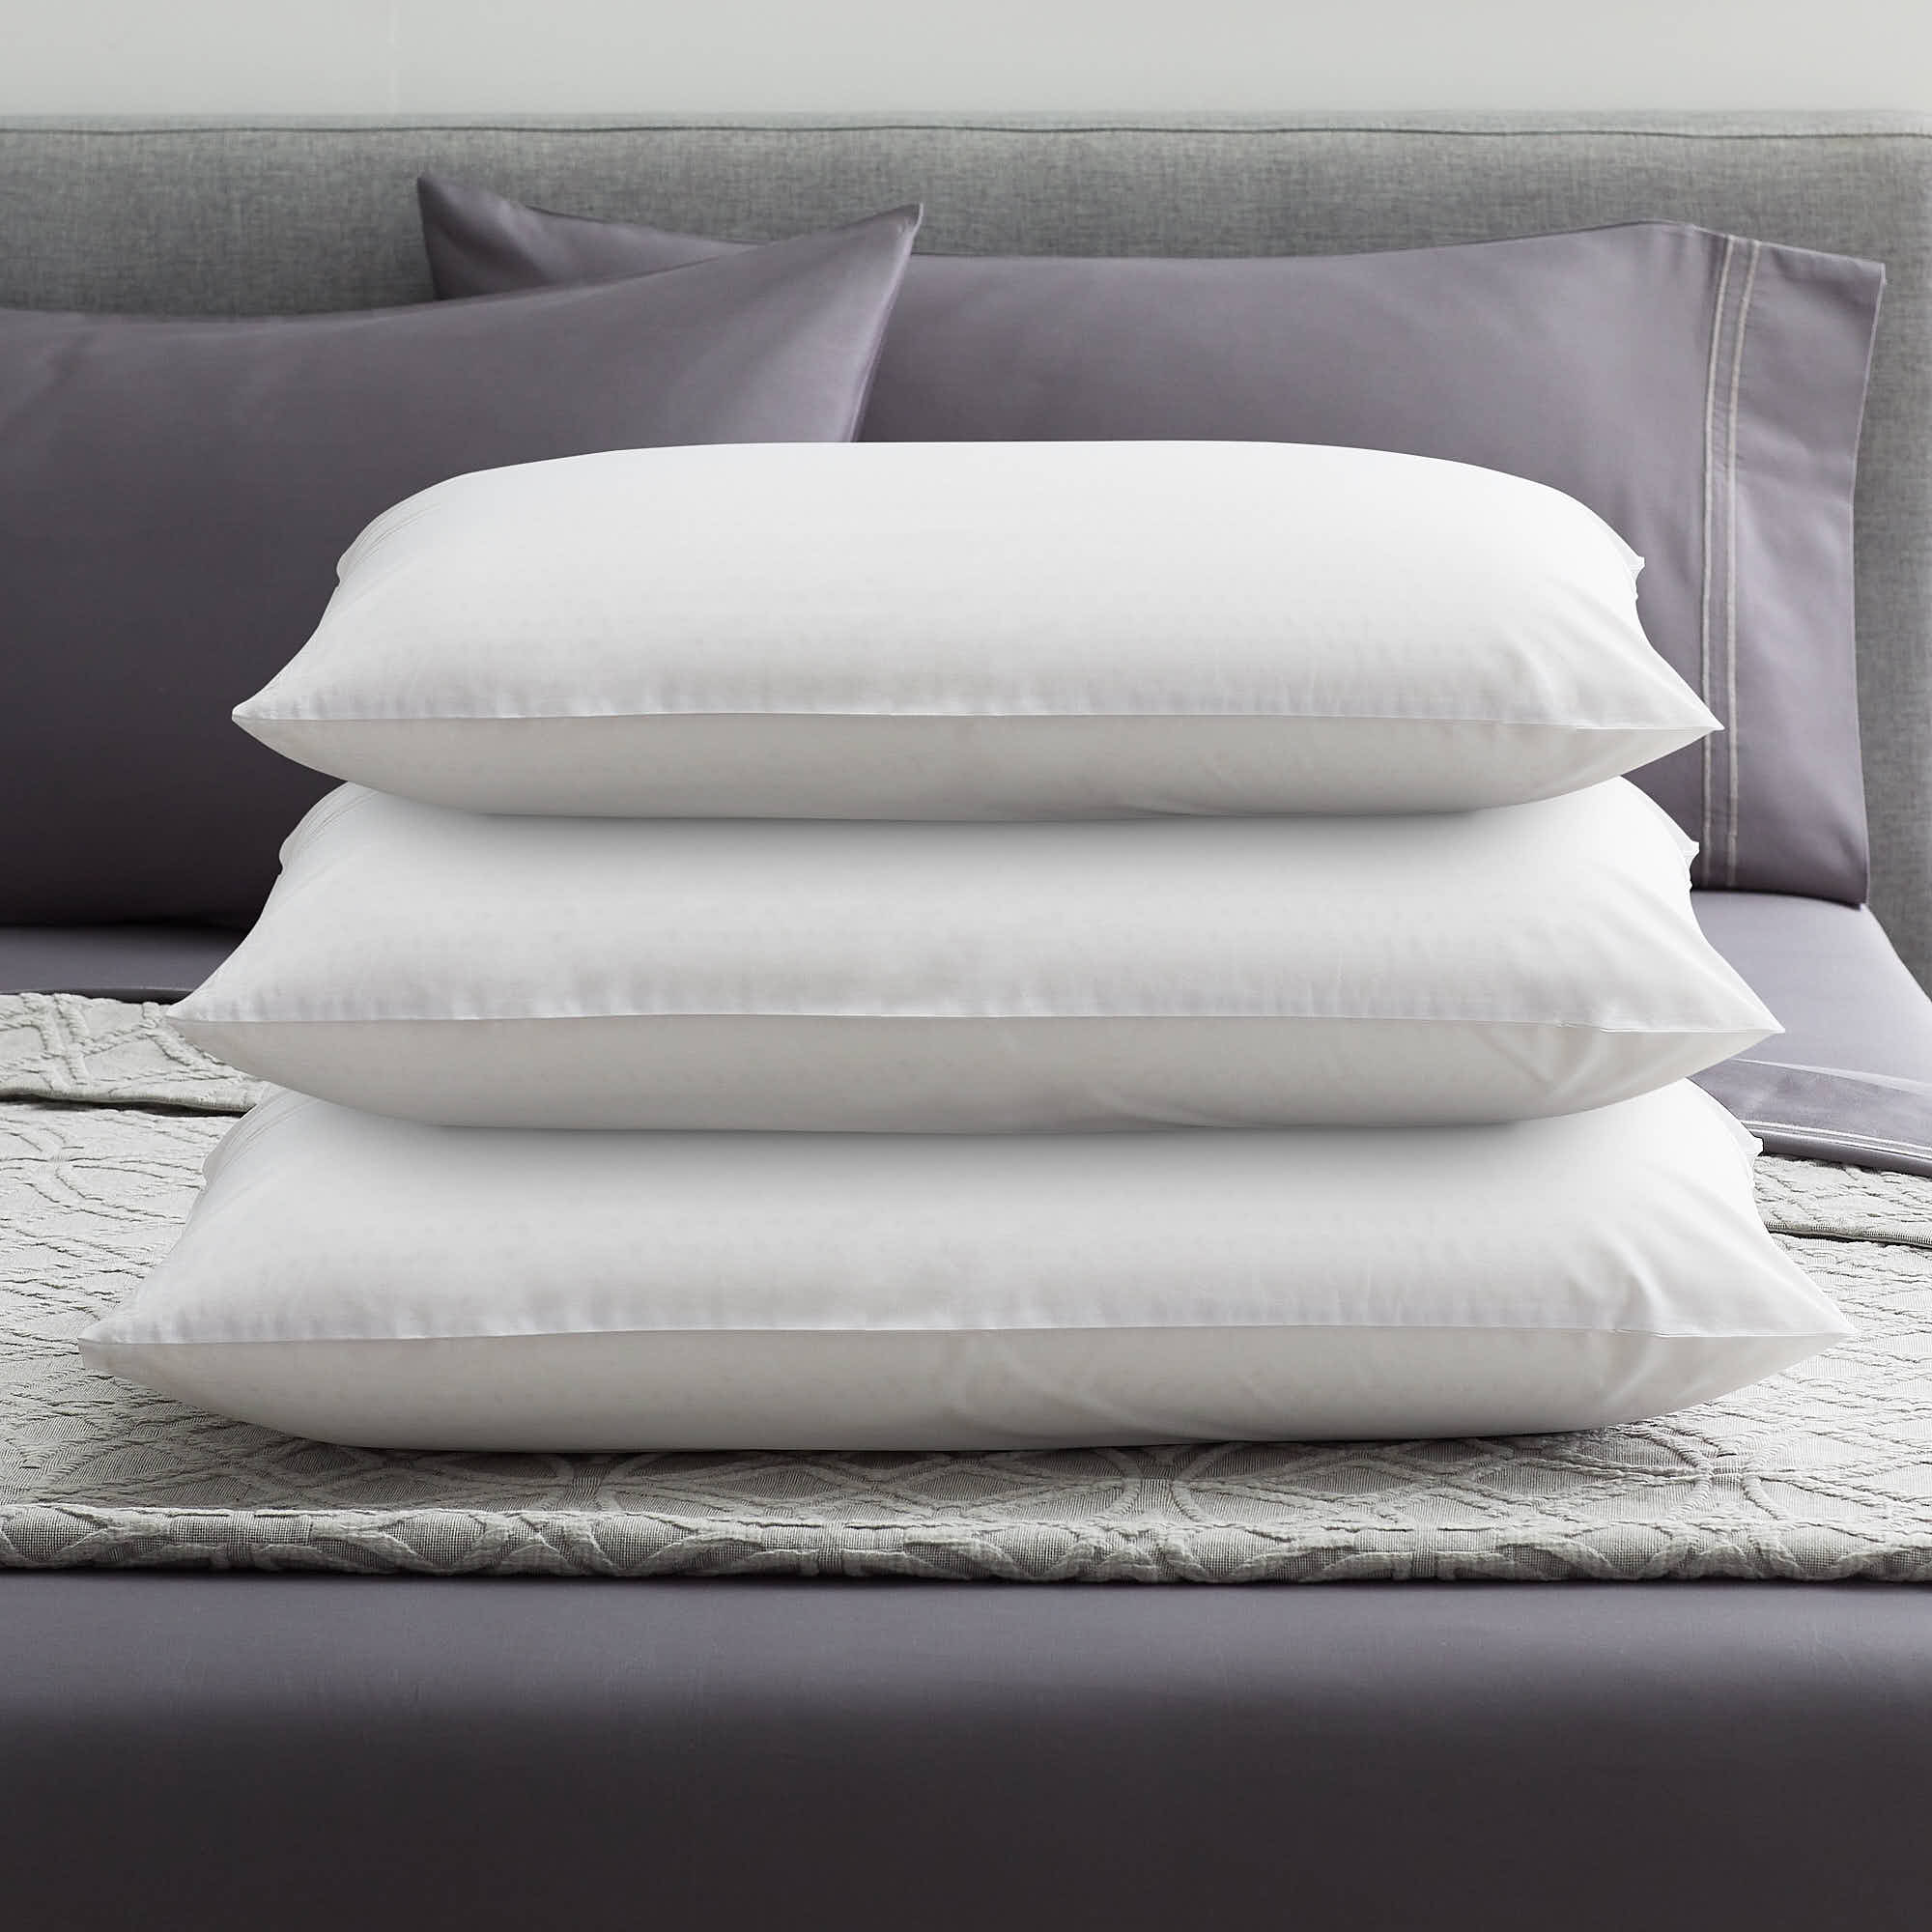 Buy affordable Mylatex Full Latex Pillow at   Shop &  Explore our wide range of high-quality designer pillows, quilts, comforters  and beddings for your bedroom interior design in Singapore